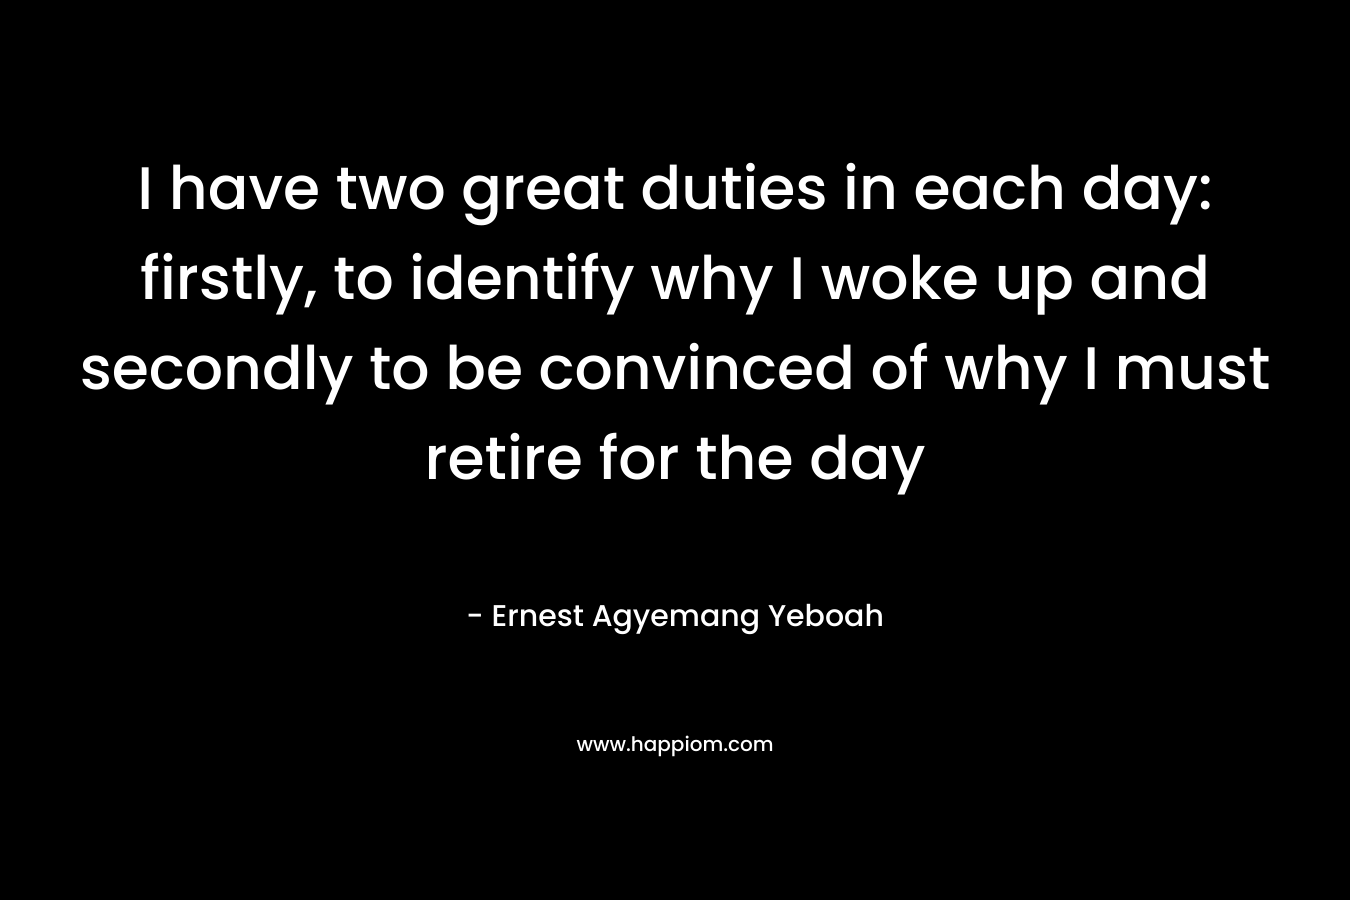 I have two great duties in each day: firstly, to identify why I woke up and secondly to be convinced of why I must retire for the day